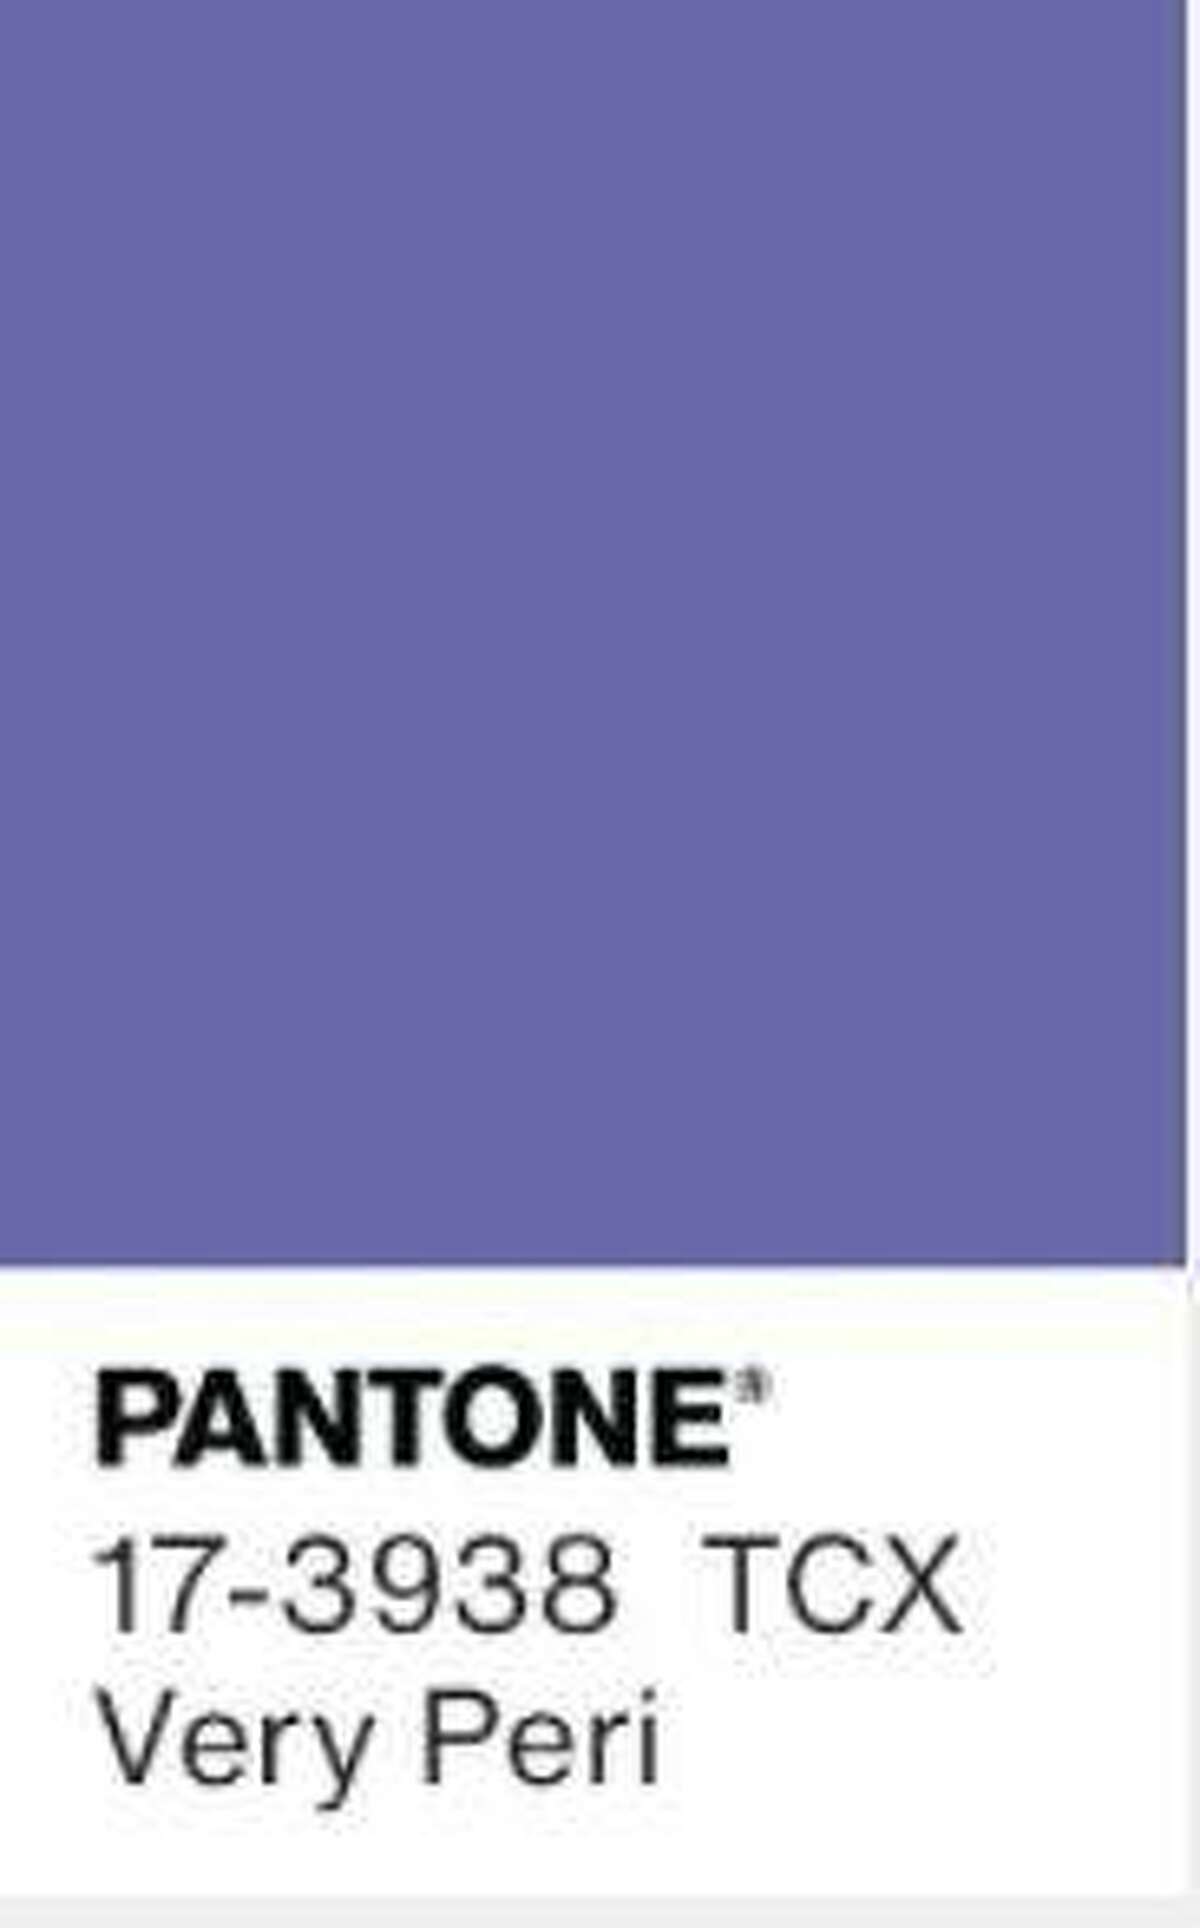 New: For the first time since it's been announcing colors of the year, Pantone has created a new color -- Very Peri -- to be its 2022 Color of the Year. It's a new version of periwinkle, a shade of blue with deep red-violet undertones.